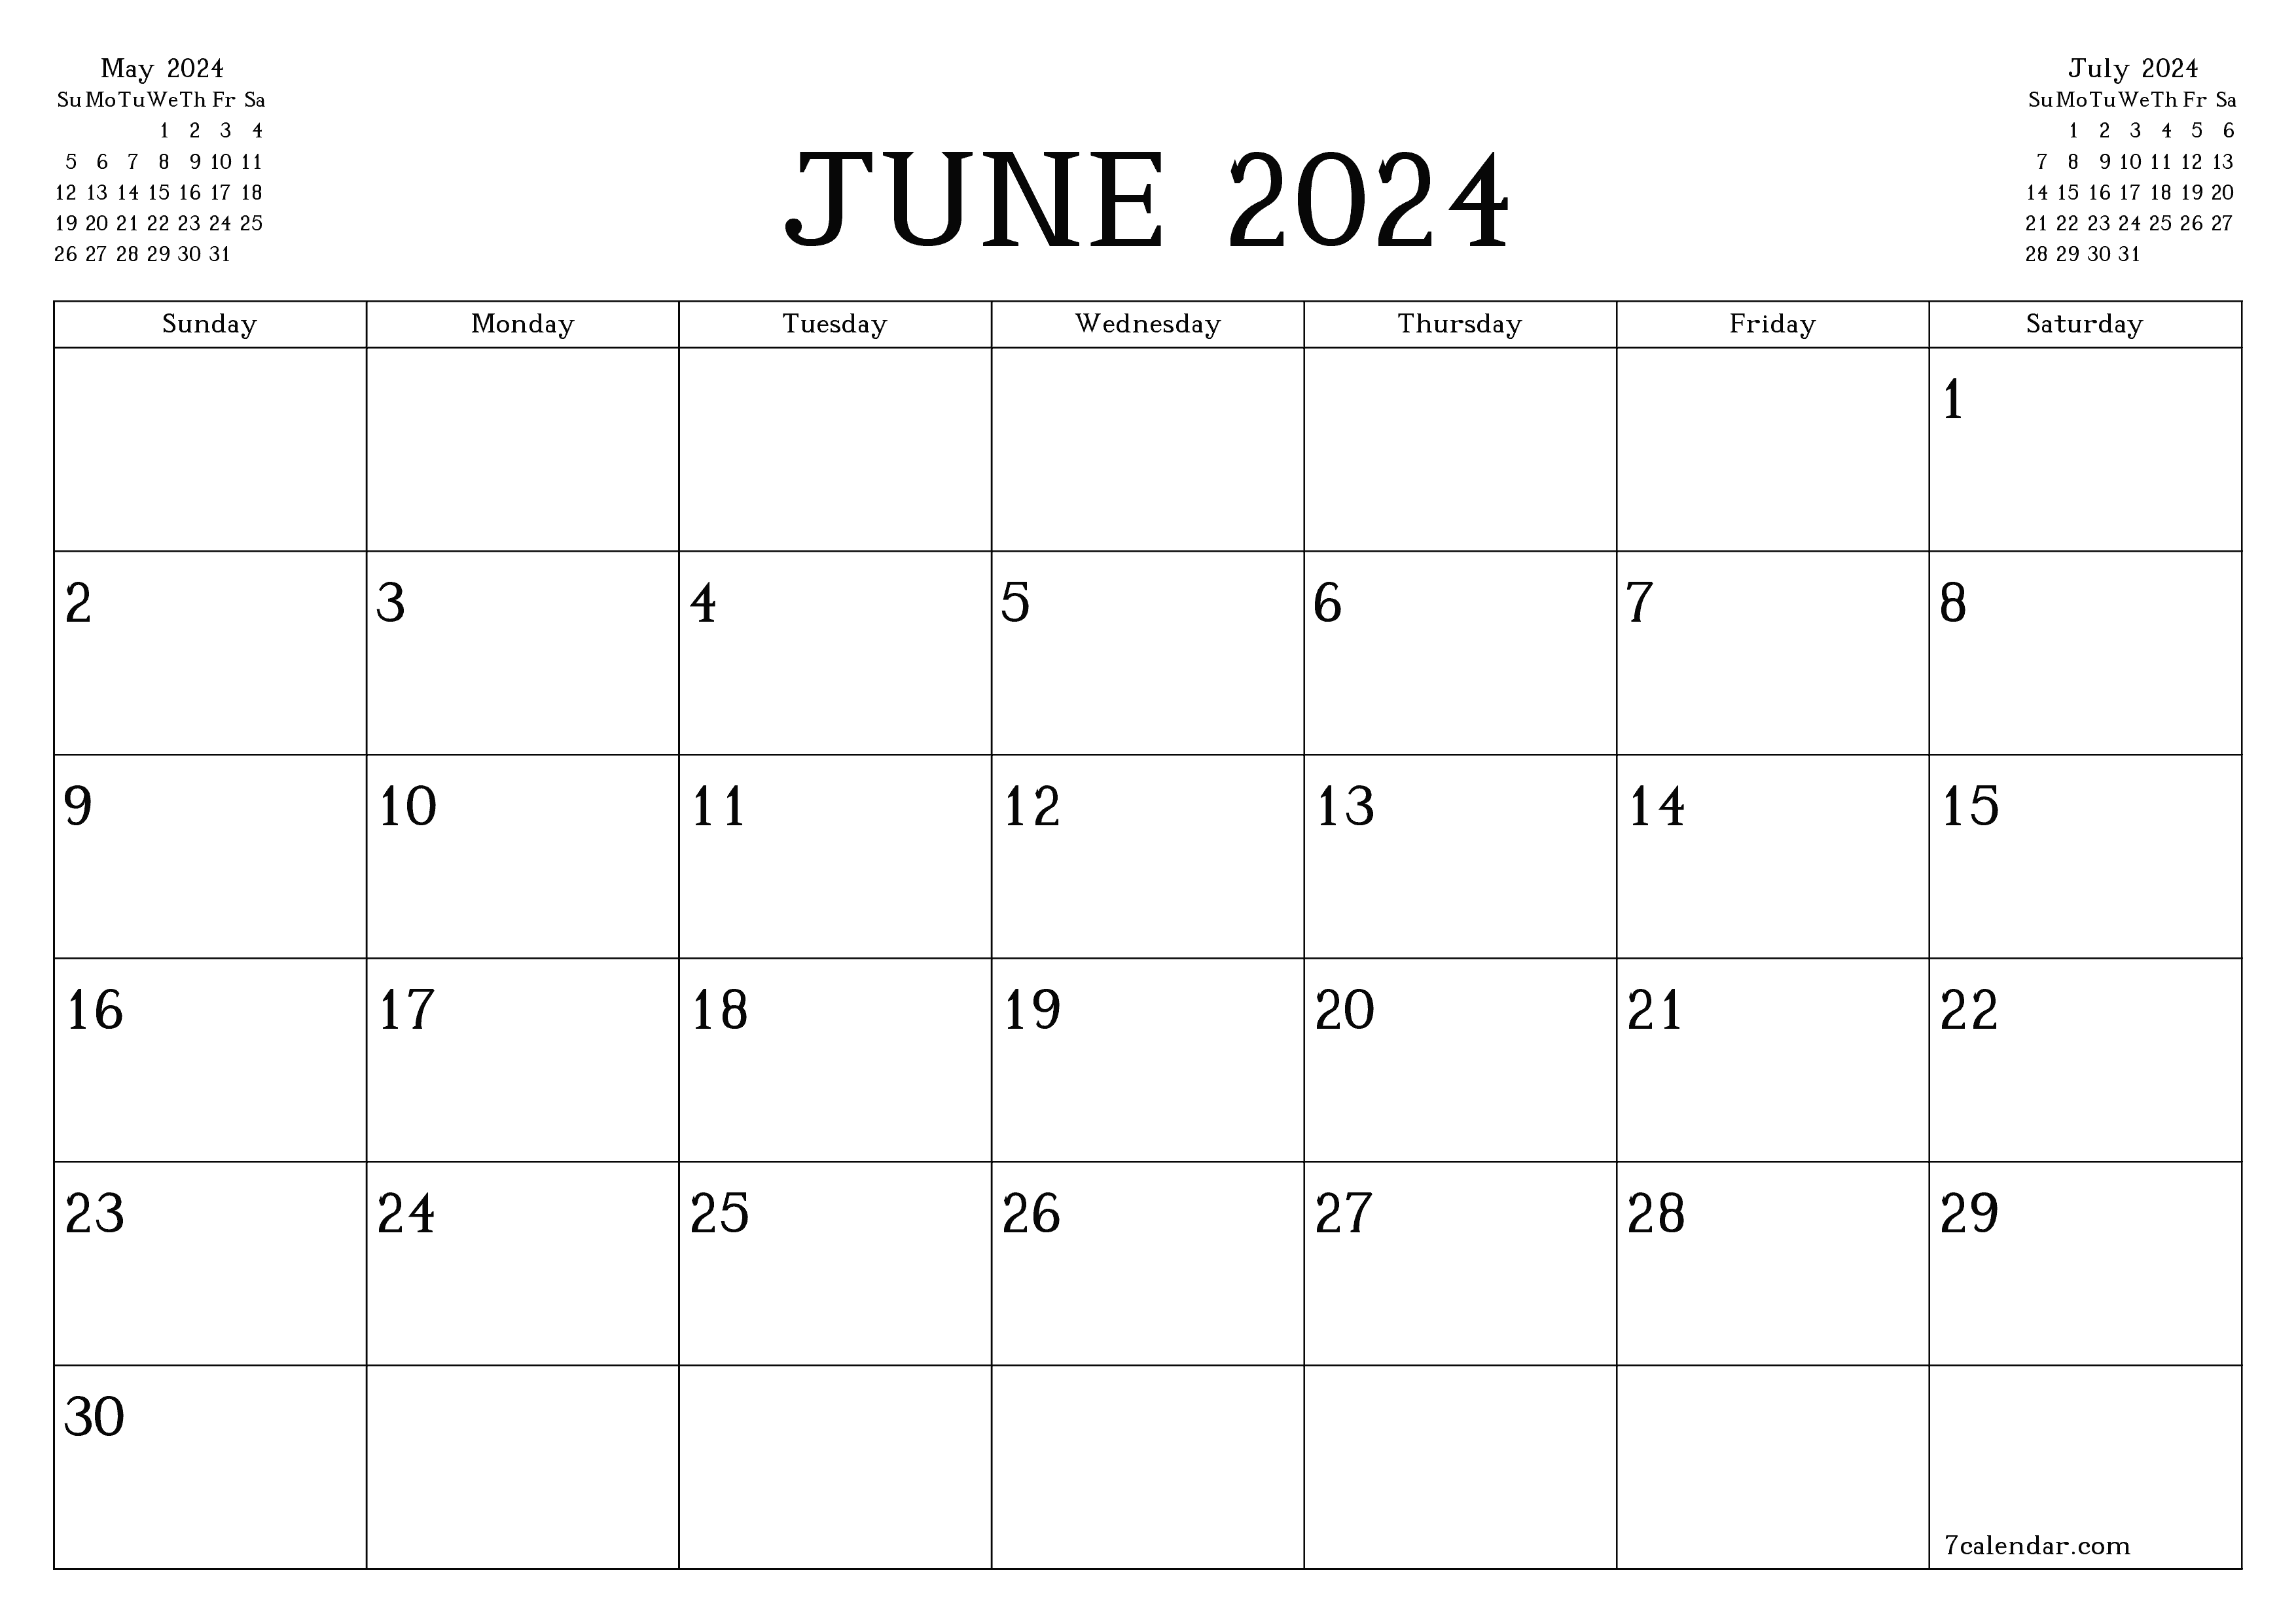 June 2024 Free Printable Calendars And Planners, Pdf Templates for Google Calendar June 2024 Printable